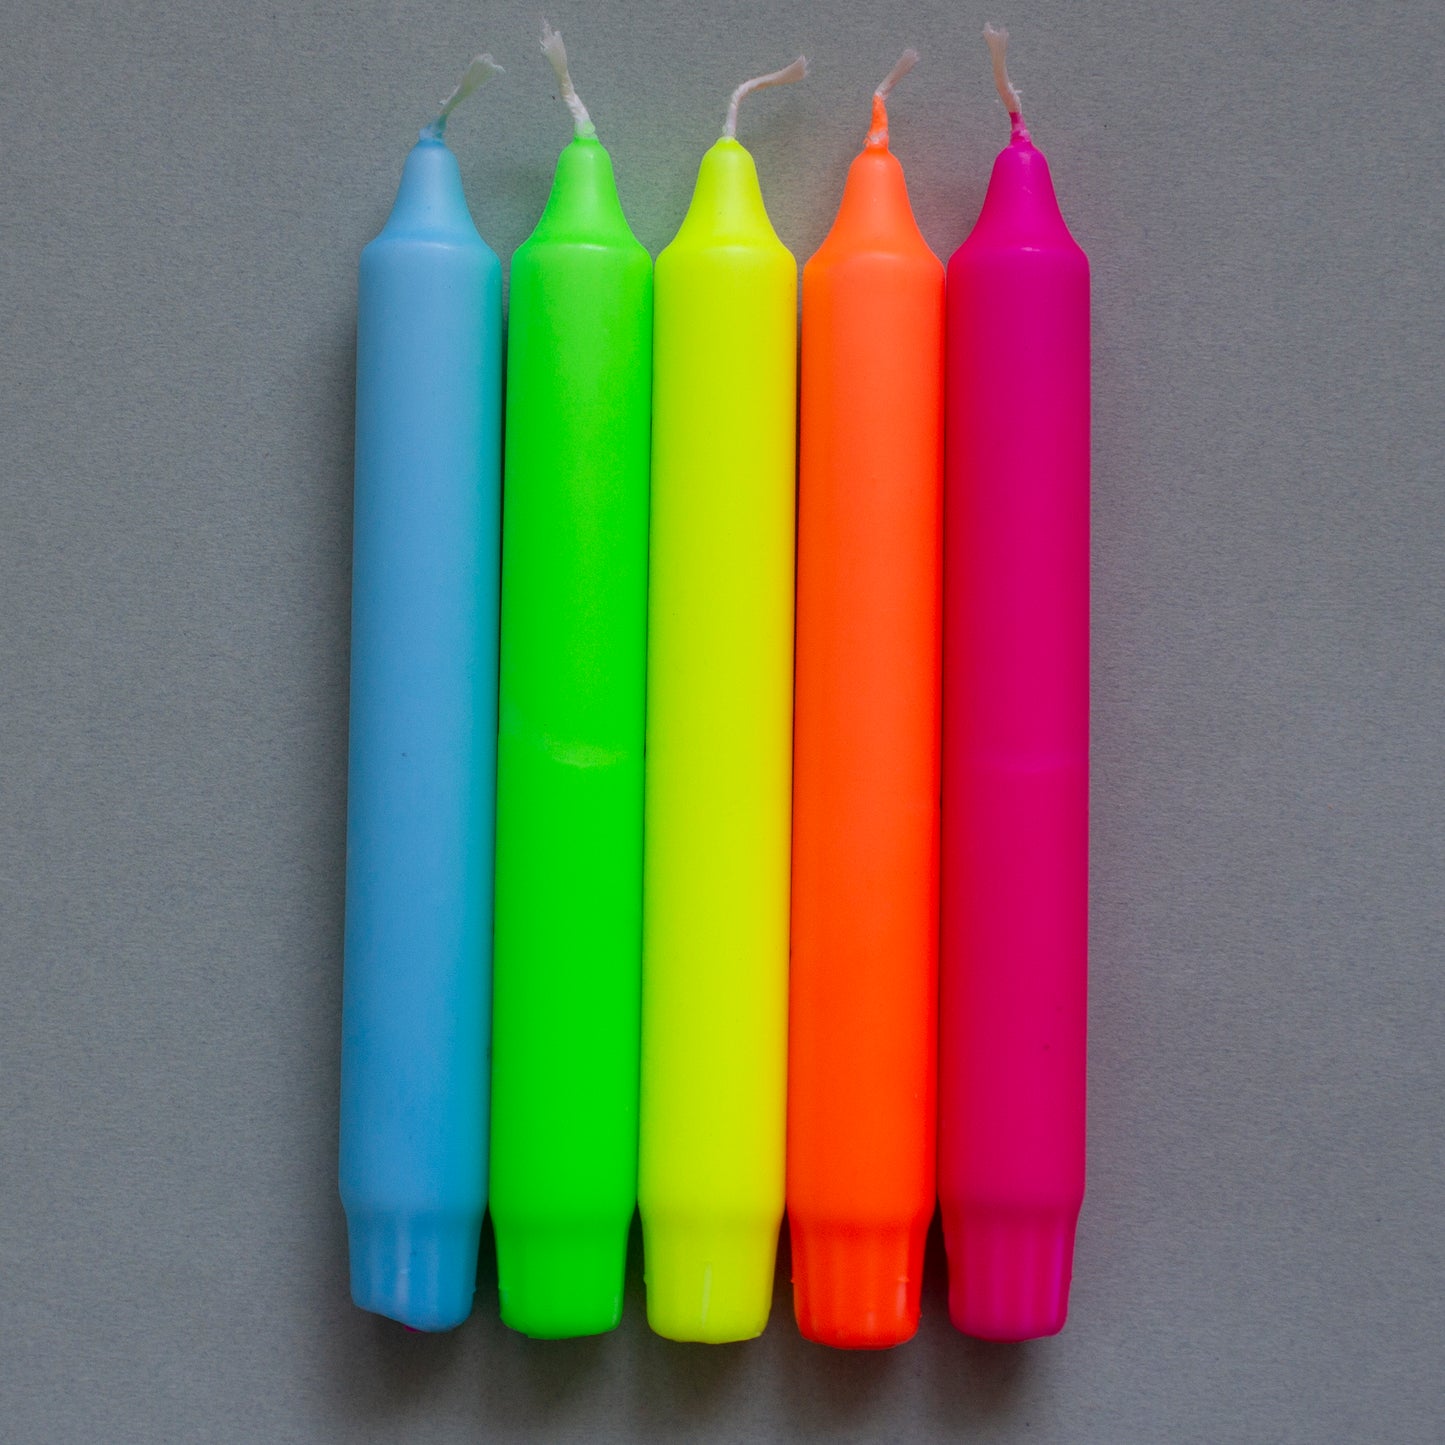 5 NEON CANDLES